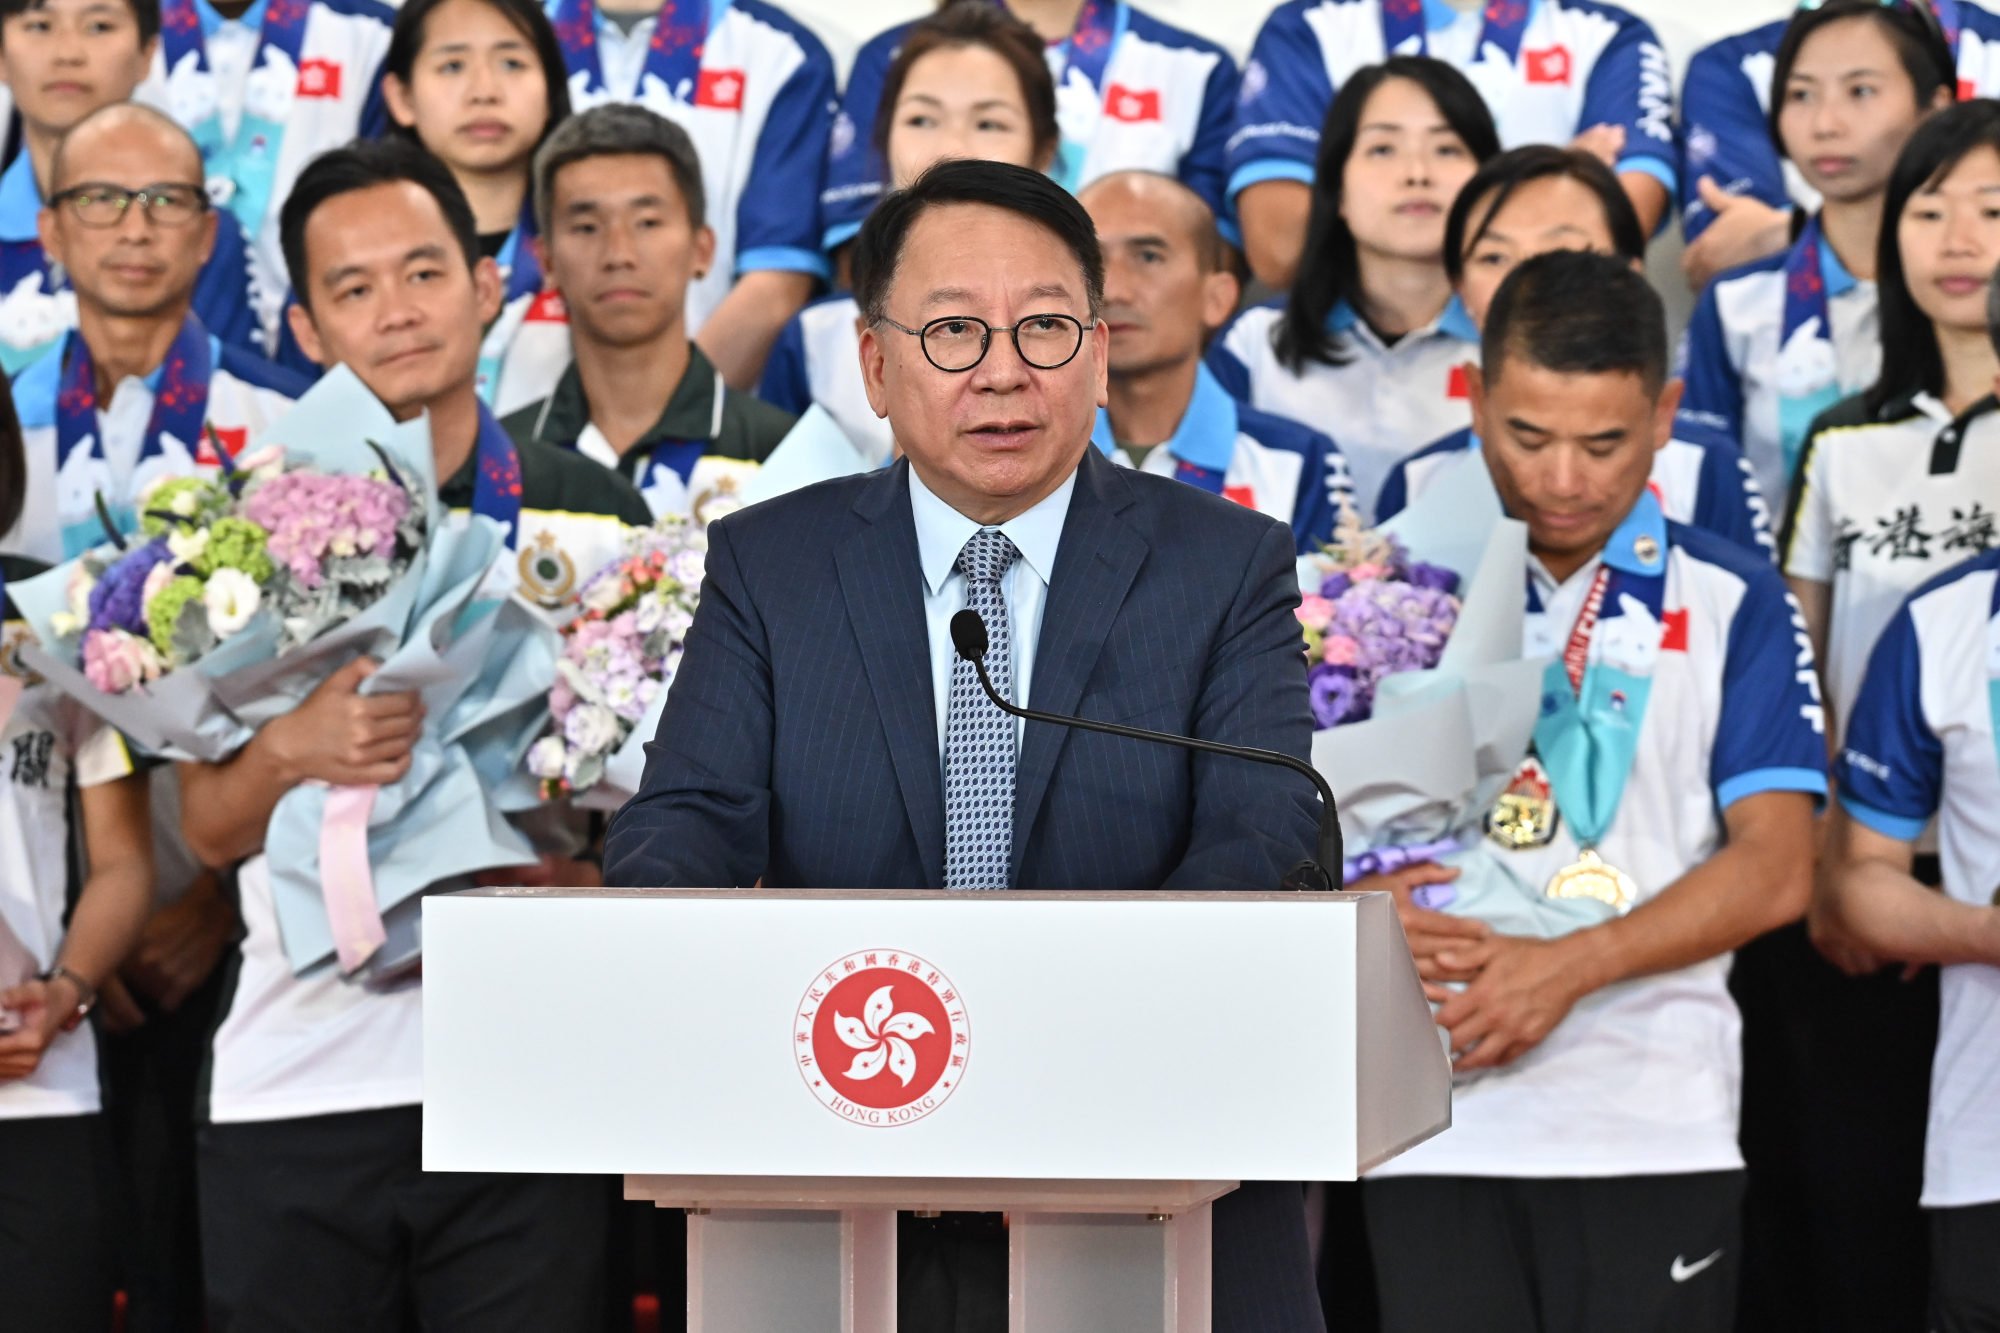 Chief Secretary Chan Kwok-ki welcomes home the disciplined services team that competed at the World Police and Fire Games in Canada. Photo: Handout